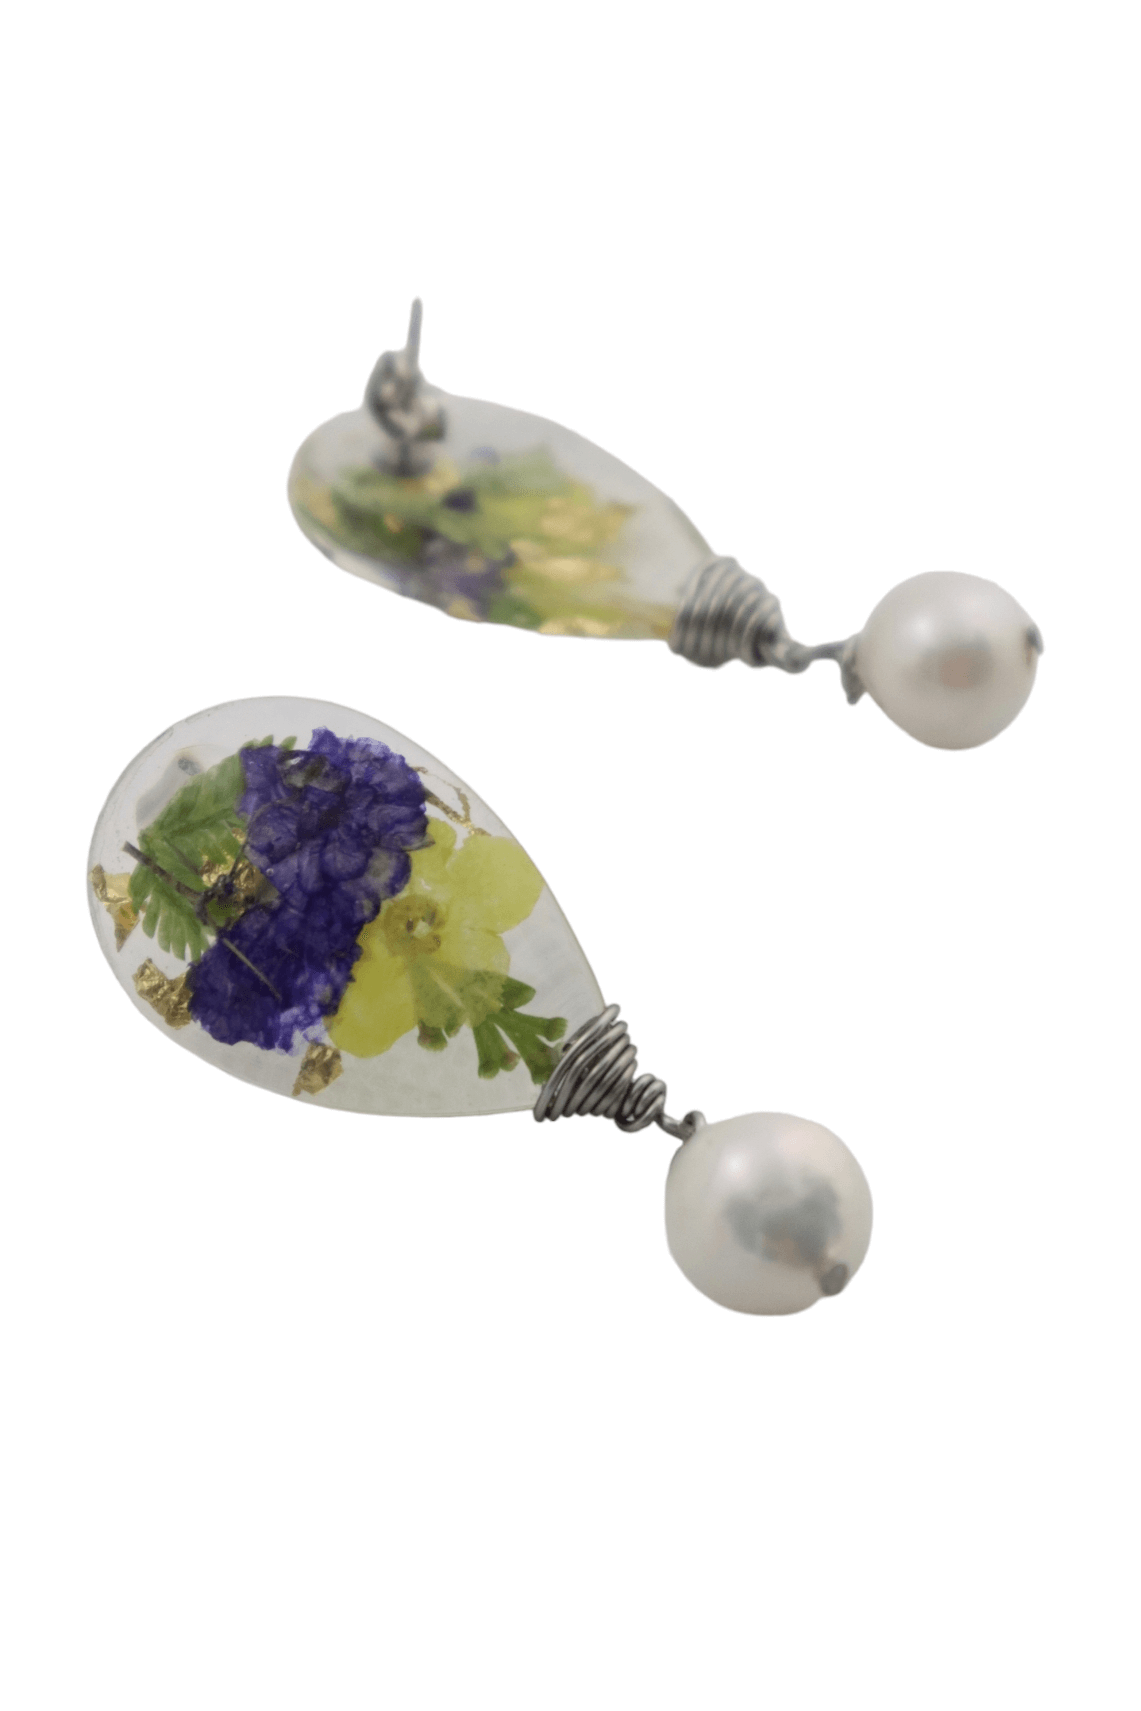 Flower-jewelry---pearl-drop-earrings-for-wedding----Kaleidoscopes-And-Polka-Dots